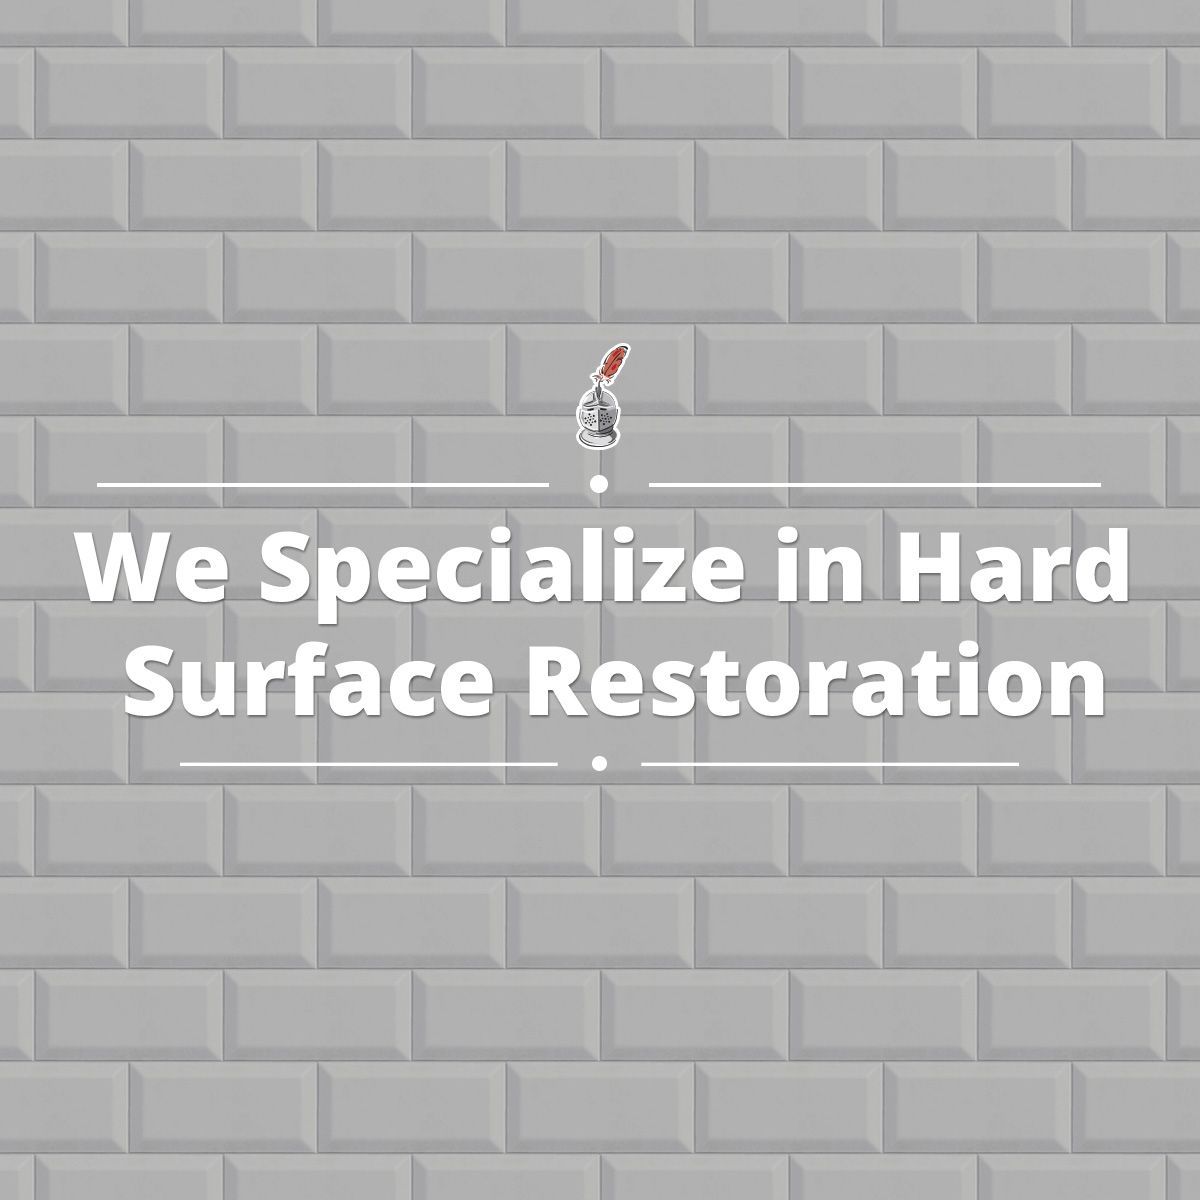 We Specialize in Hard Surface Restoration